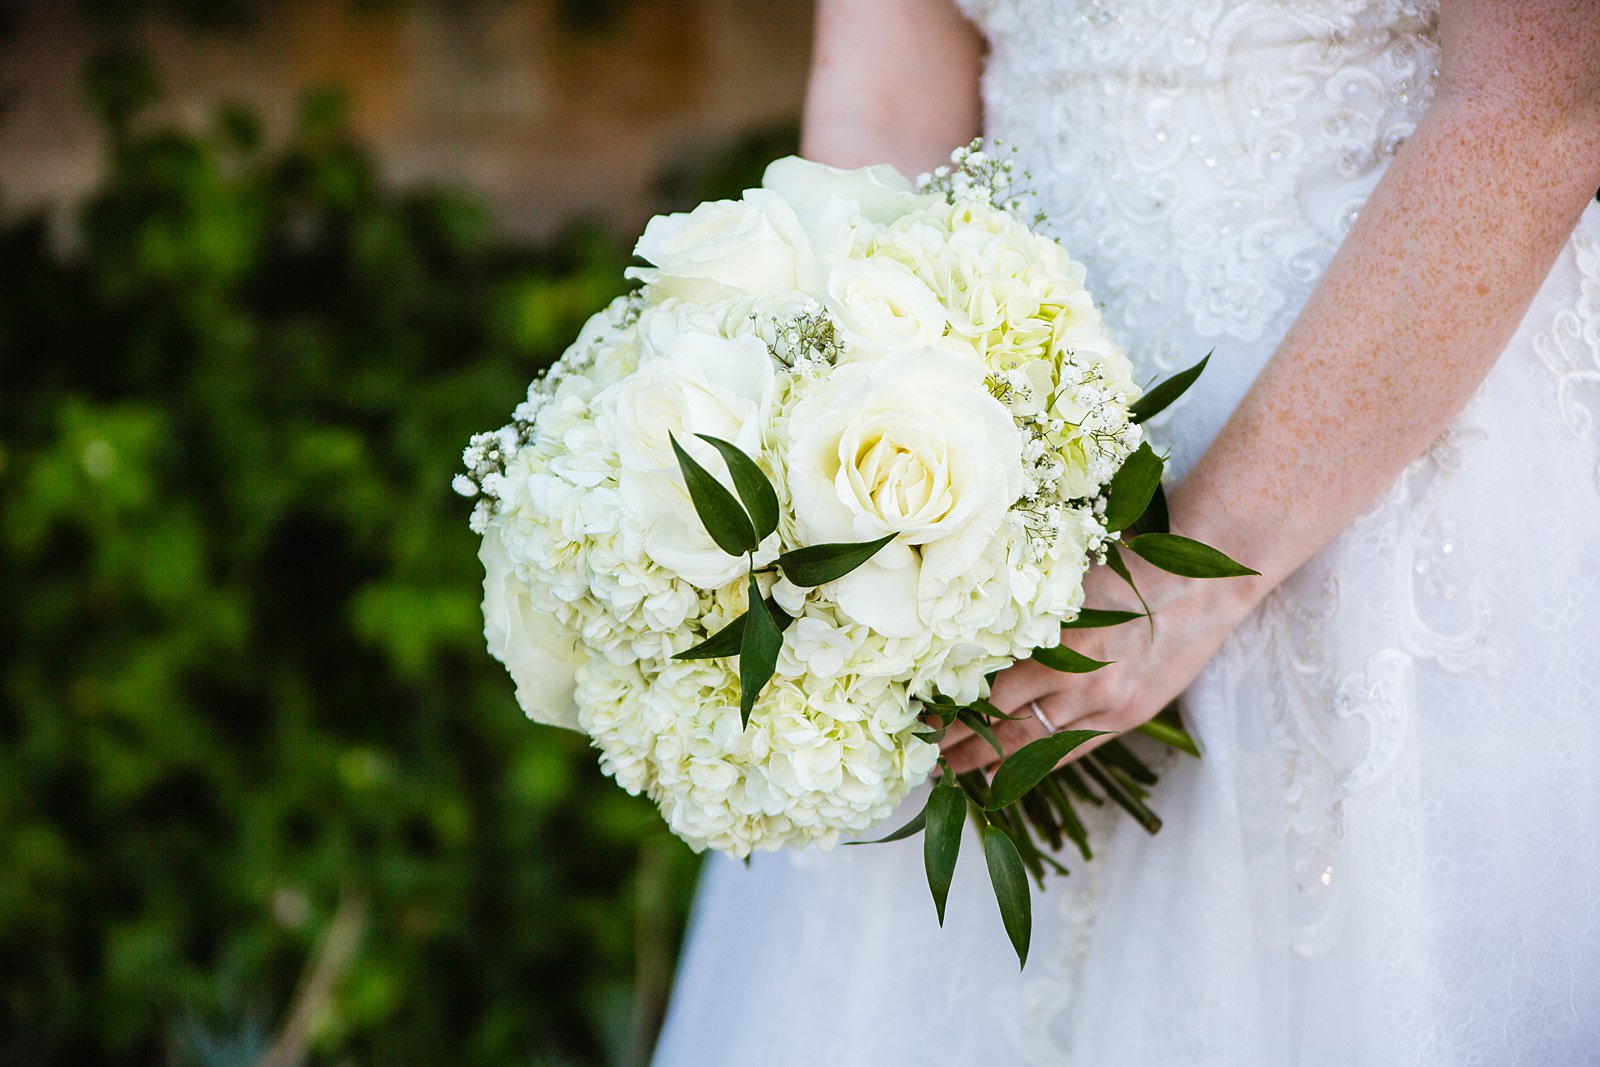 Bride's modern white bouquet by PMA Photography.